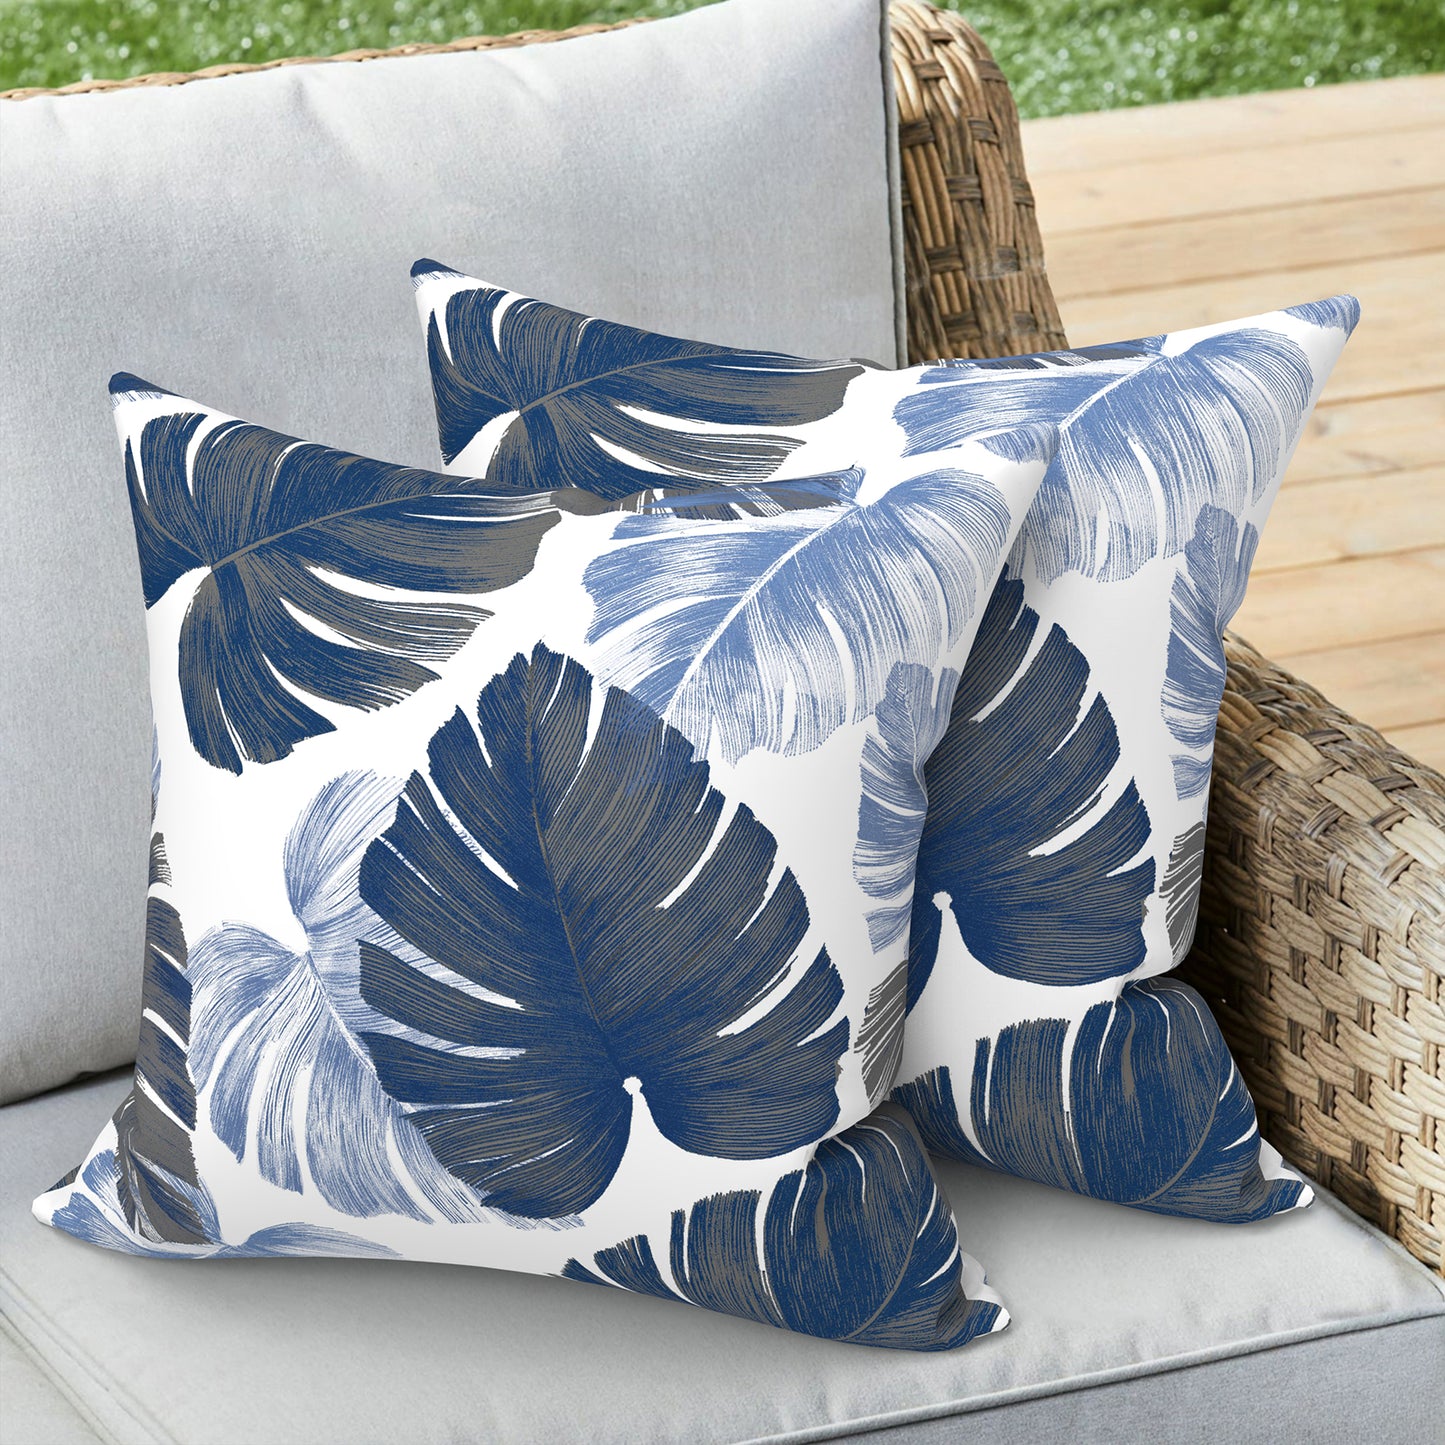 Melody Elephant Outdoor/Indoor Throw Pillow Covers Set of 2, All Weather Square Pillow Cases 16x16 Inch, Patio Cushion Pillow of Home Furniture Use, Monstera Blue